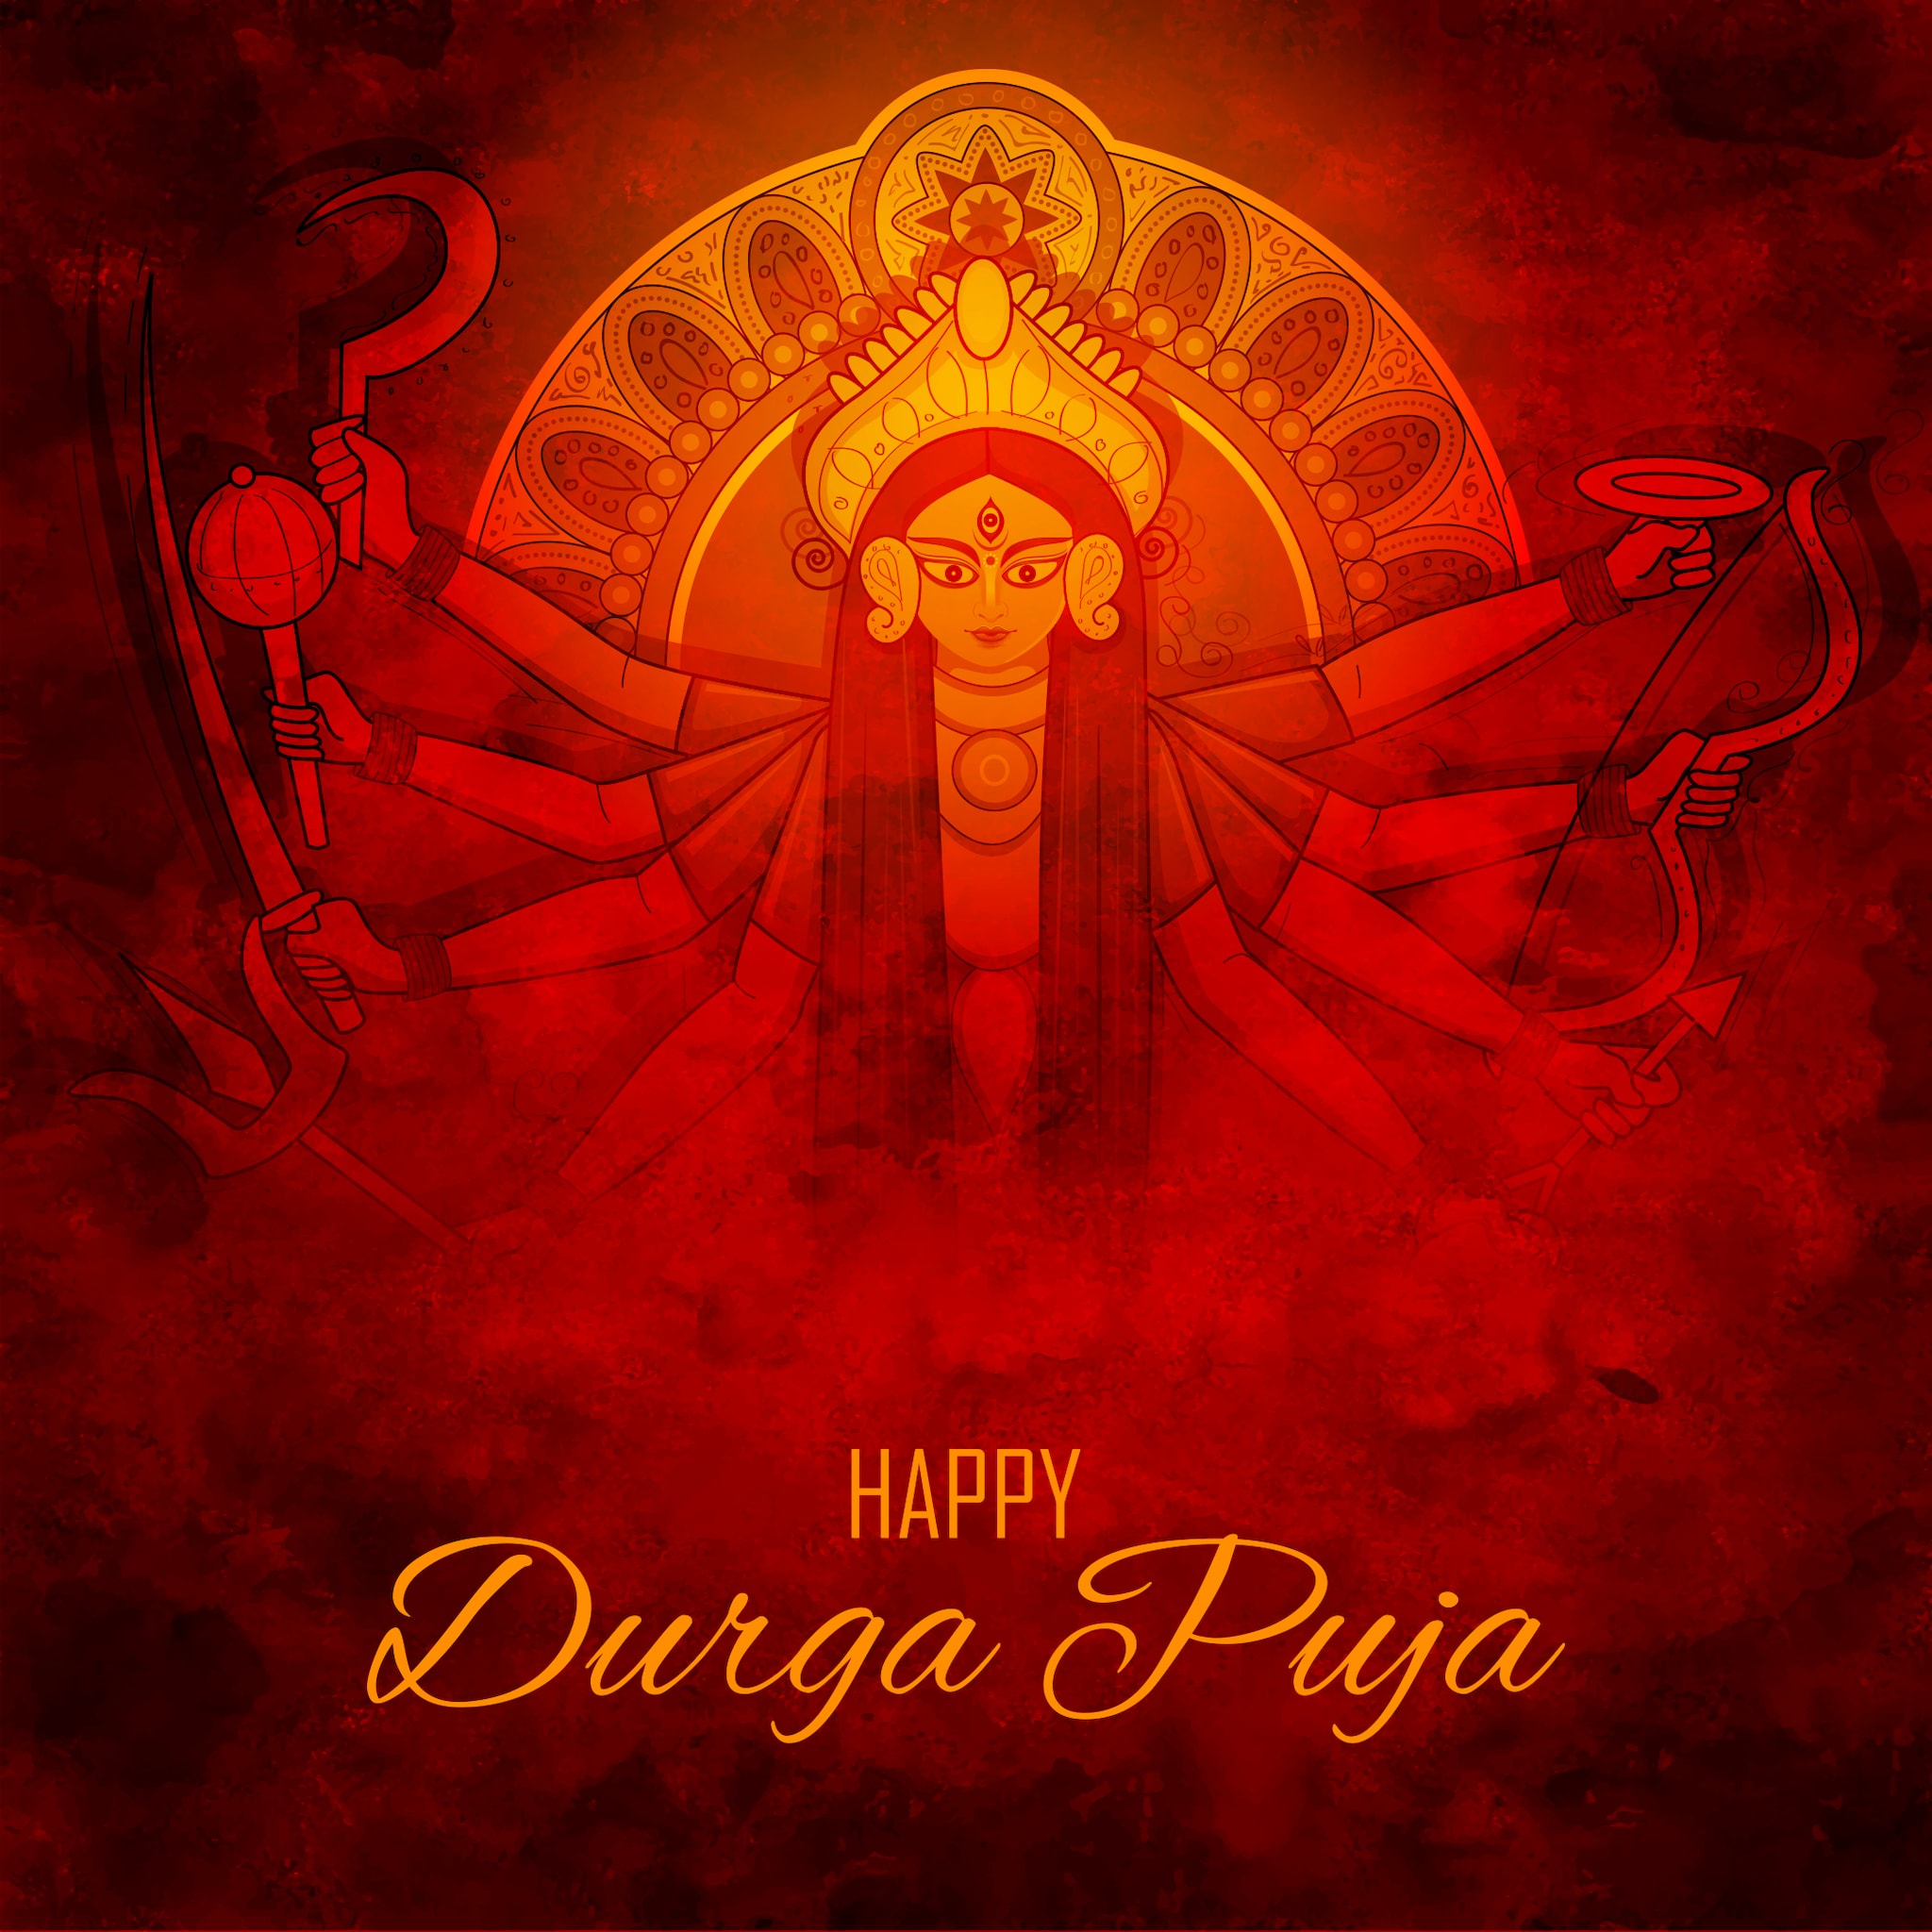 Happy Durga Puja 2021 Images Wishes Quotes Messages And Whatsapp Status To Share With 5893